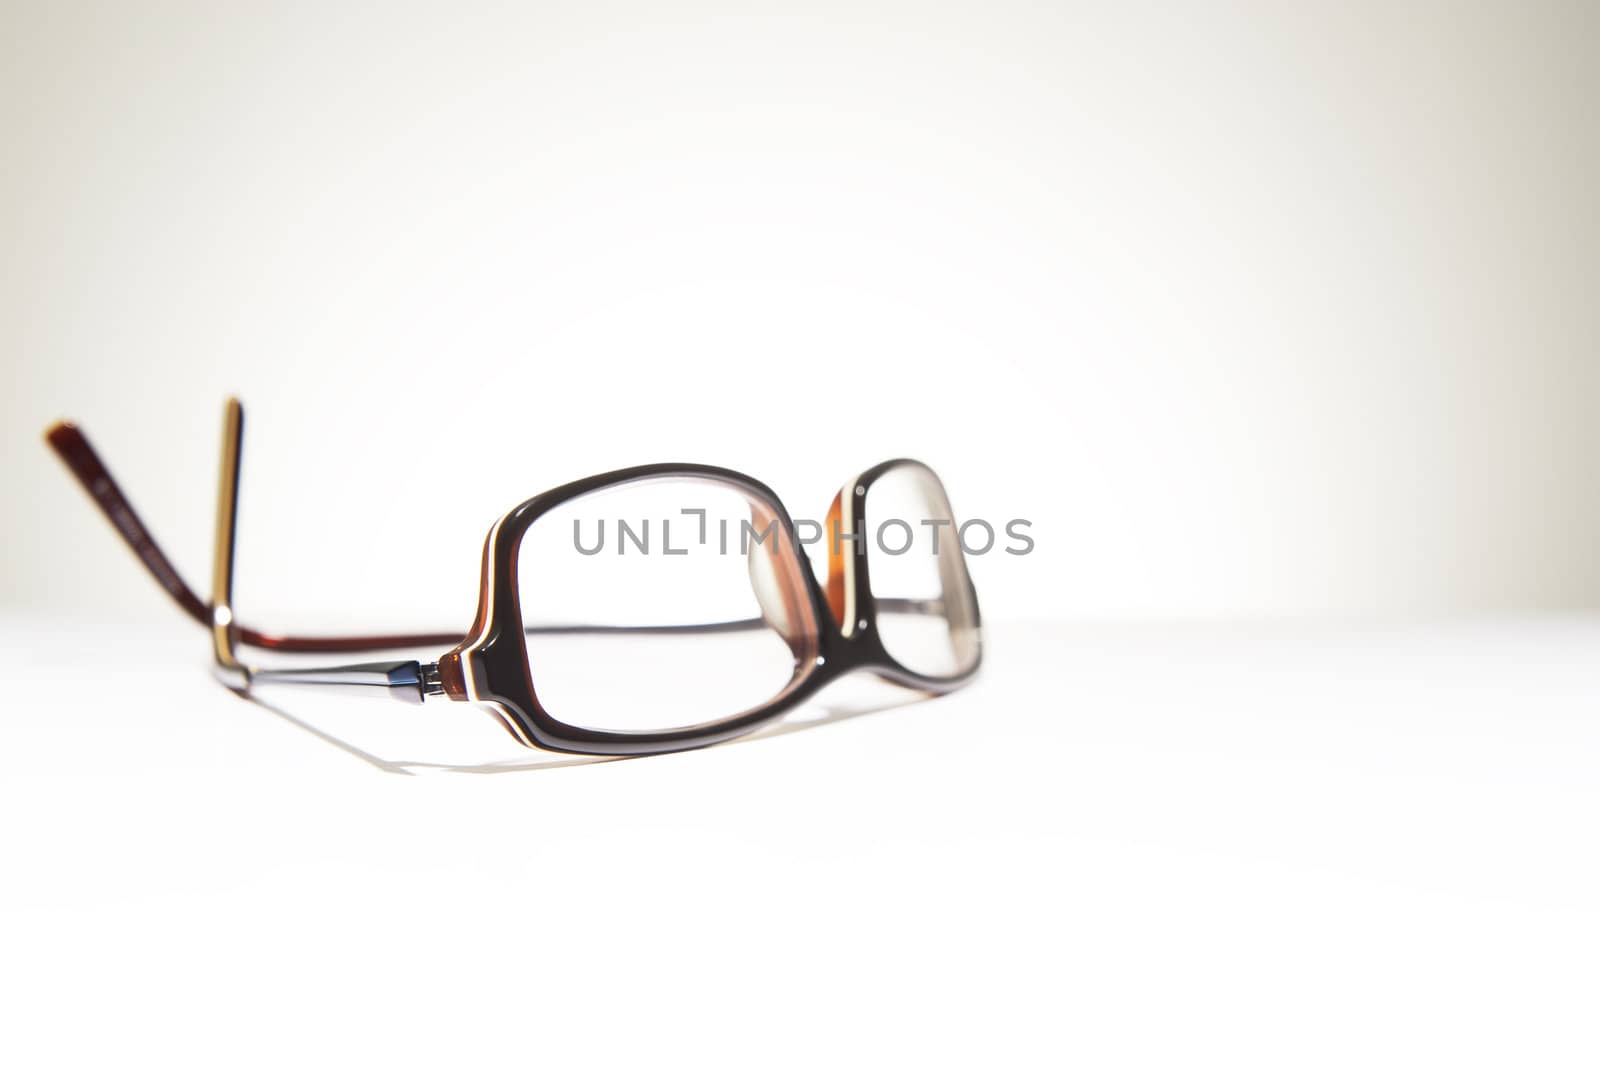 A pair of classic framed reading glasses resting on a white background with space for text